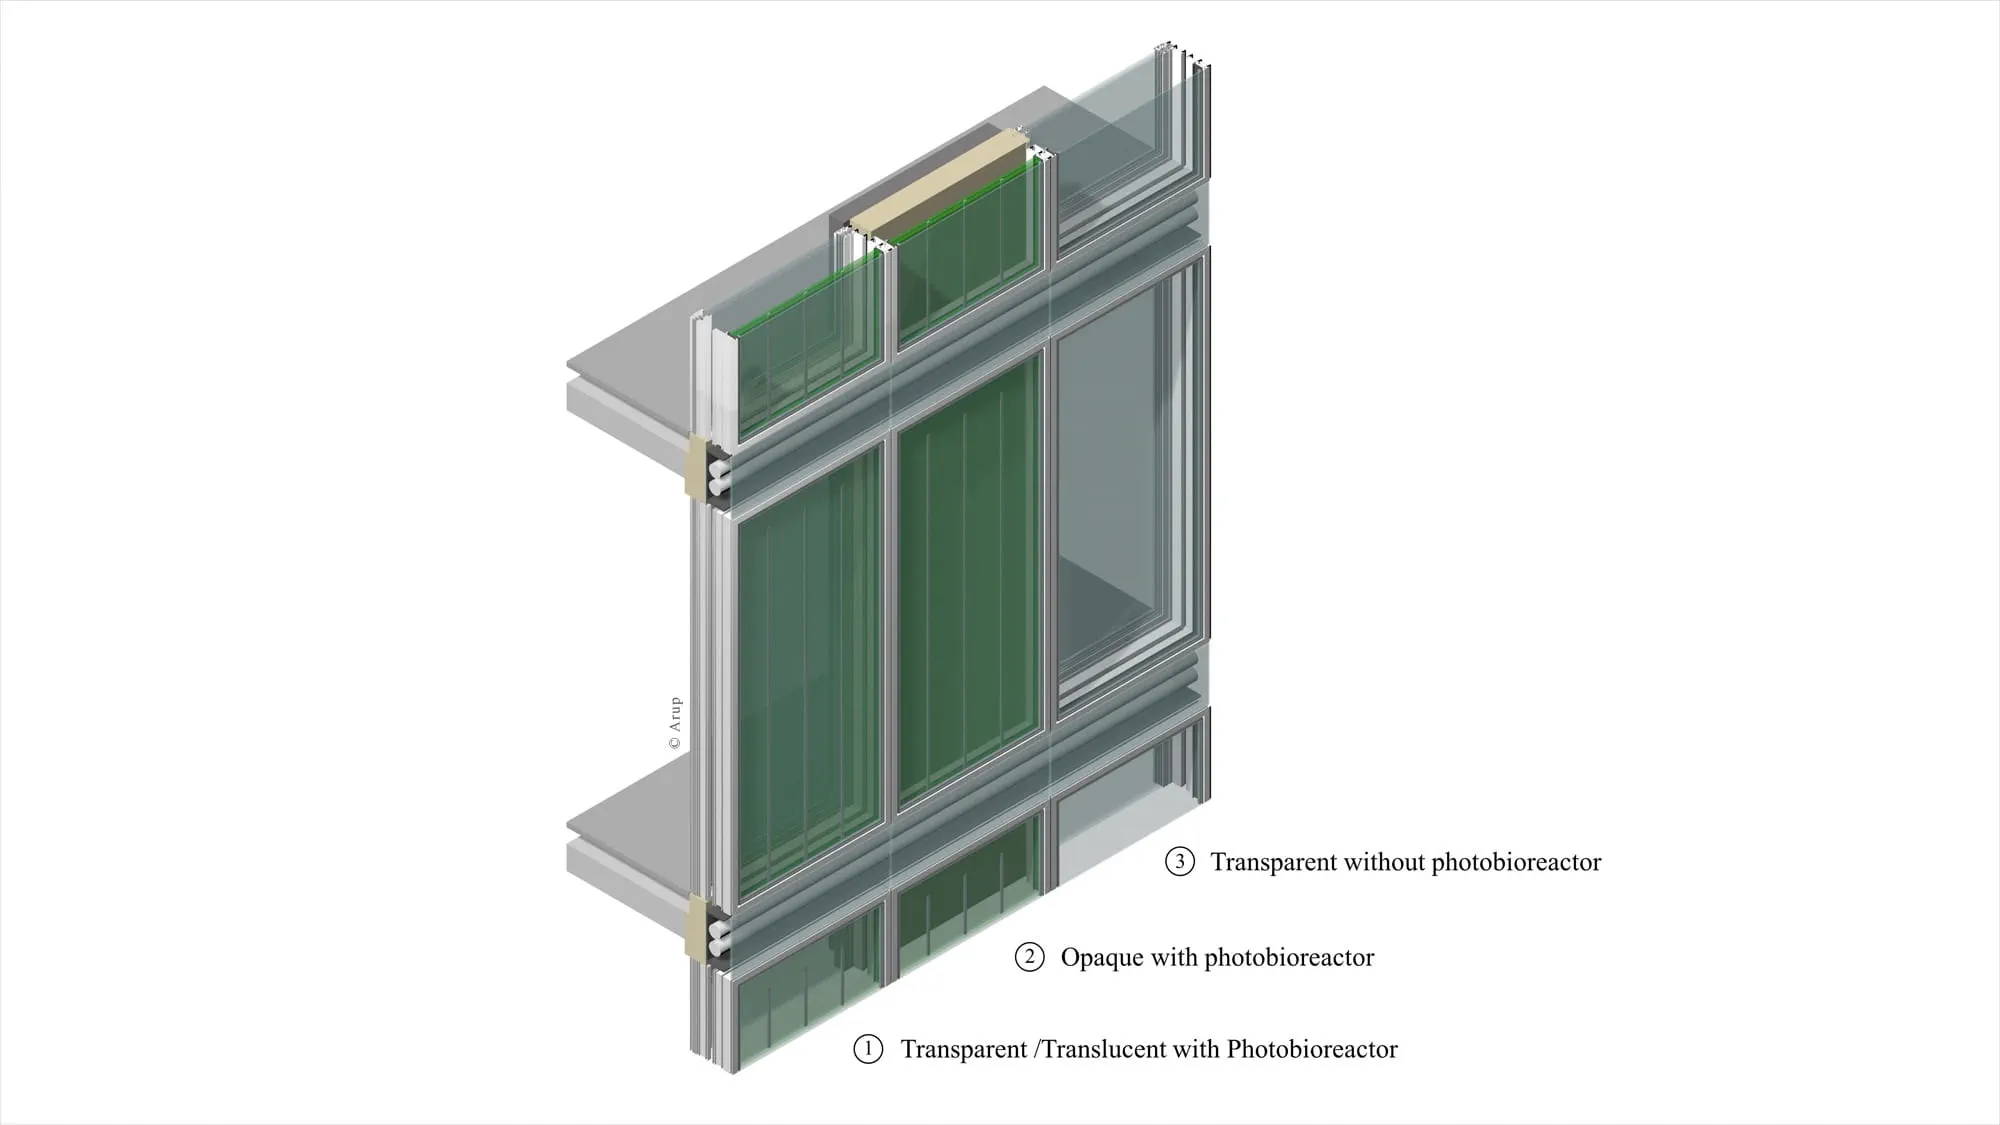 Visualisation of the three facade elements of the bioenergy facade with integrated photobioreactors